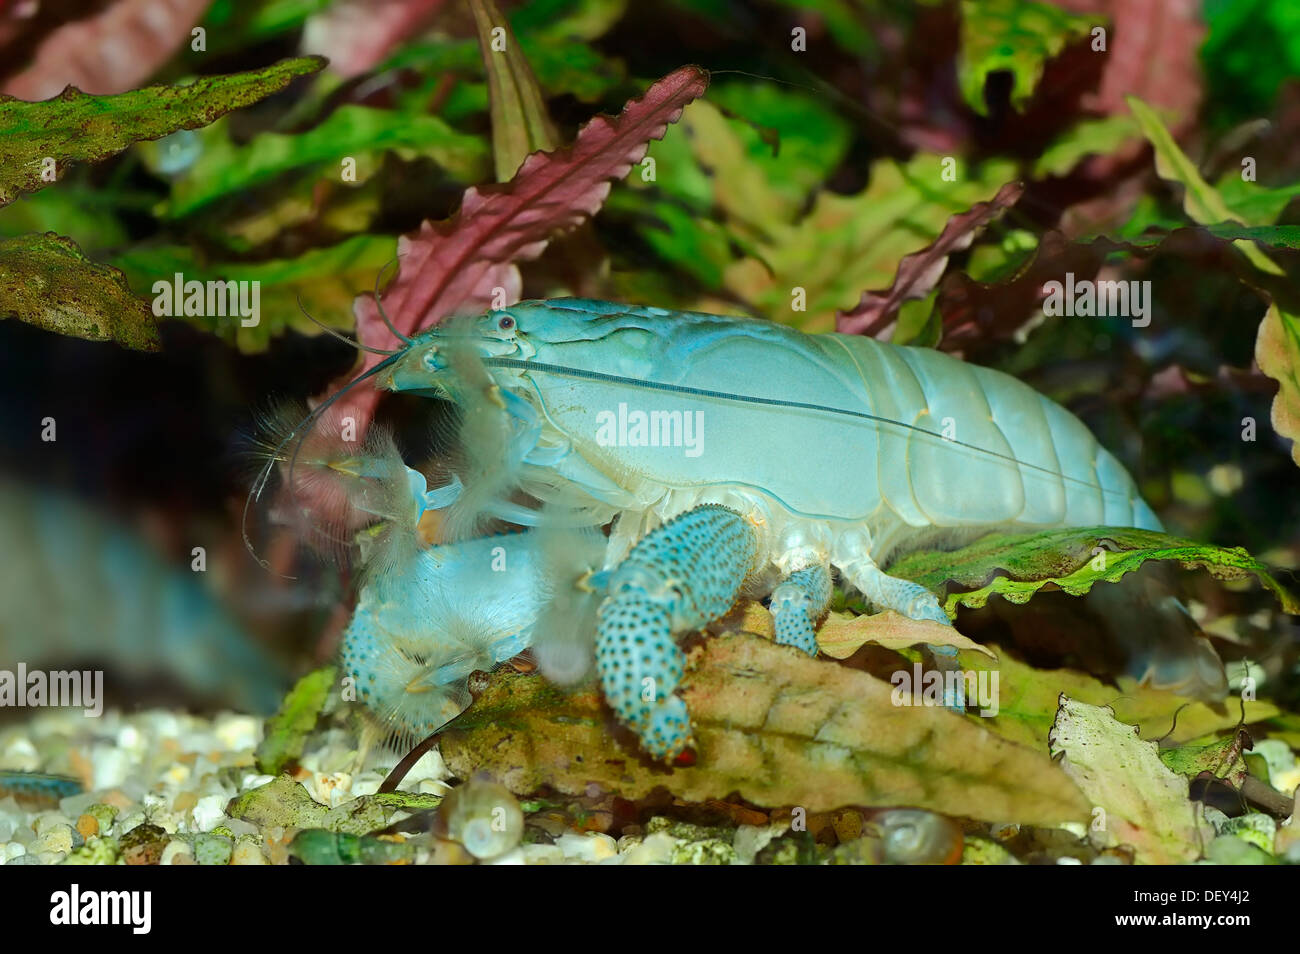 African Giant Filter Shrimp or Vampire Shrimp (Atya gabonensis), native to West Africa and South America, captive Stock Photo